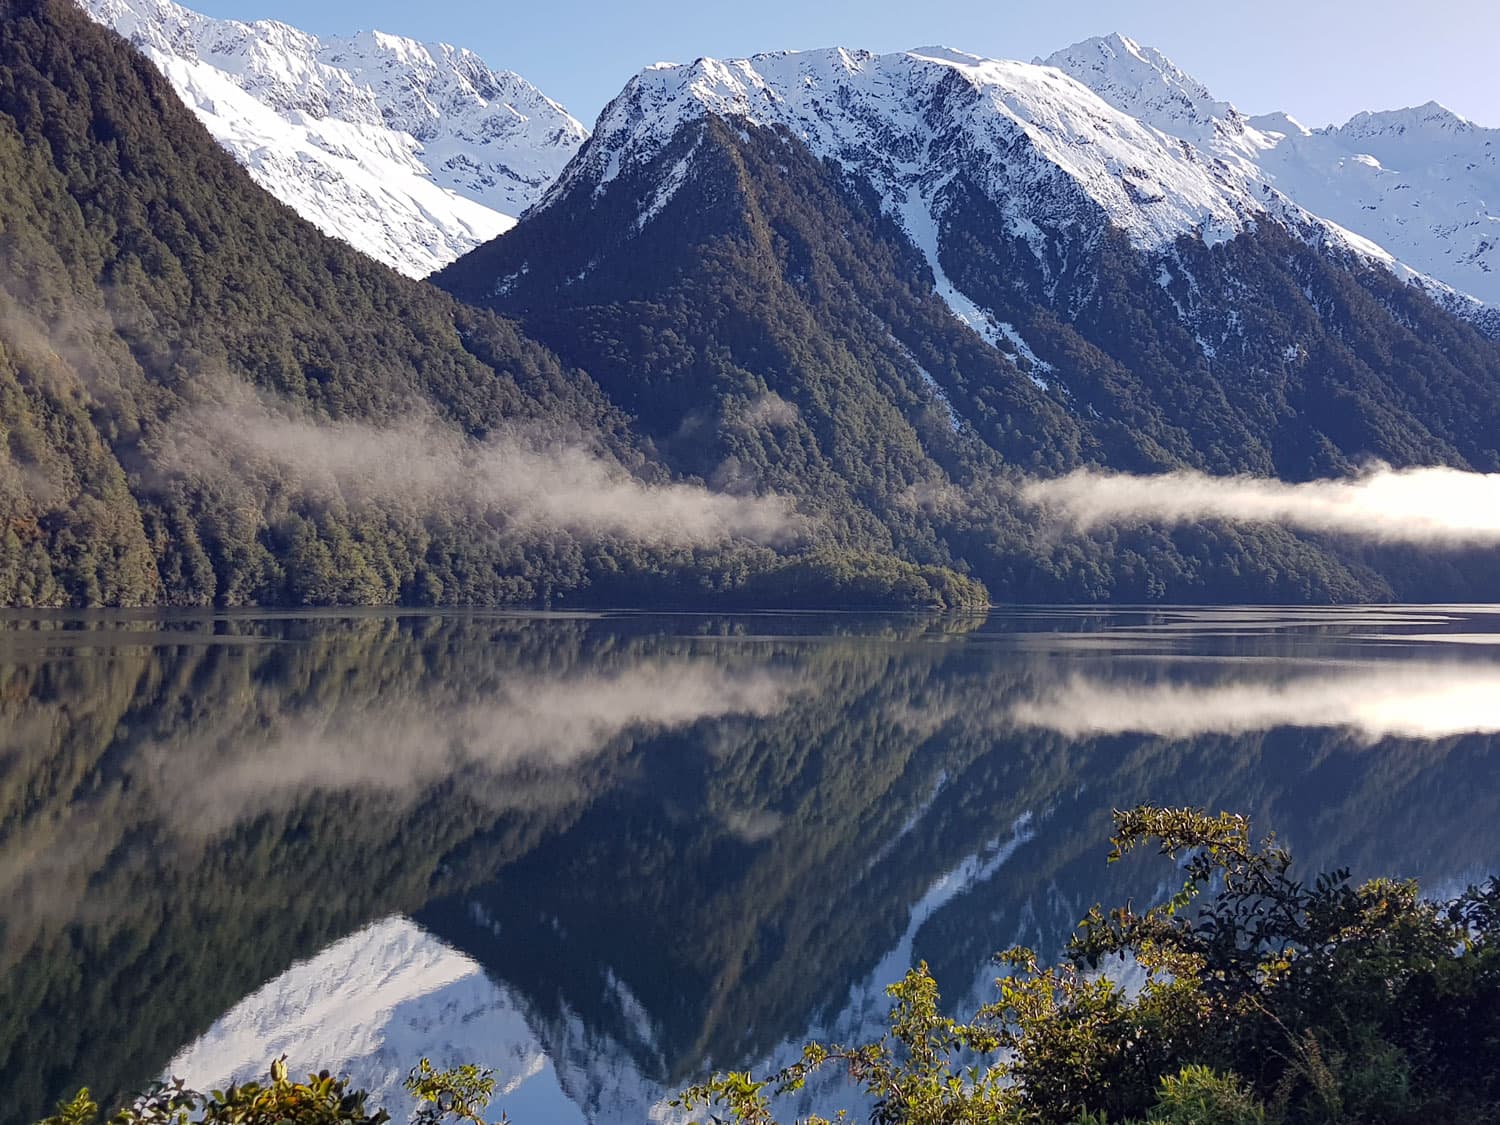 Stunning alpine scenery on the drive to Milford Sound